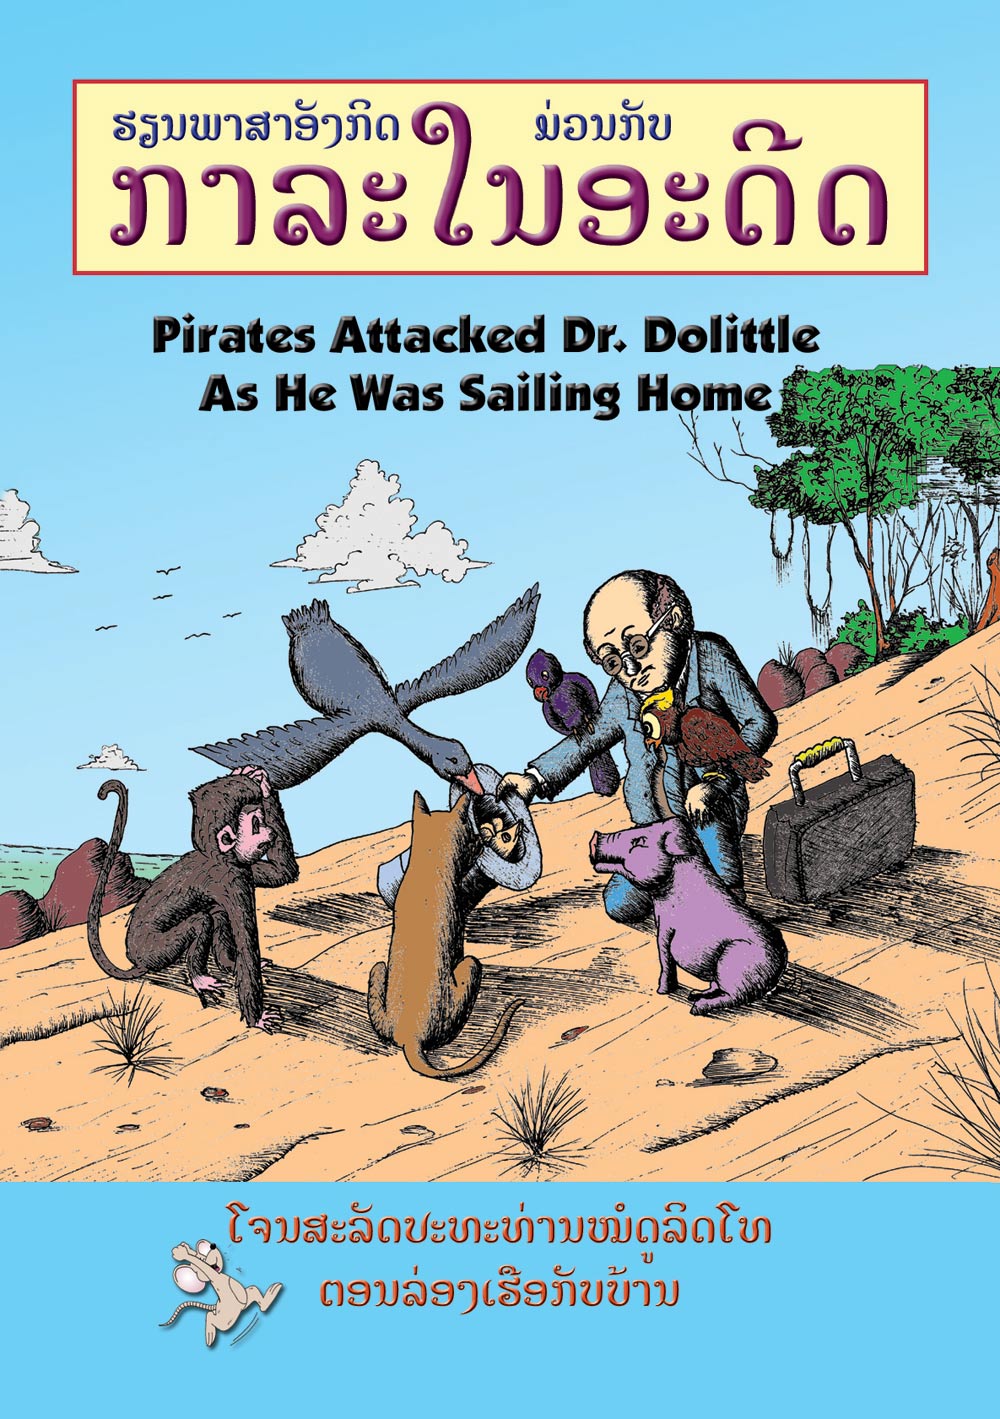 Pirates Attacked Dr. Dolittle As He Was Sailing Home large book cover, published in English for Lao students